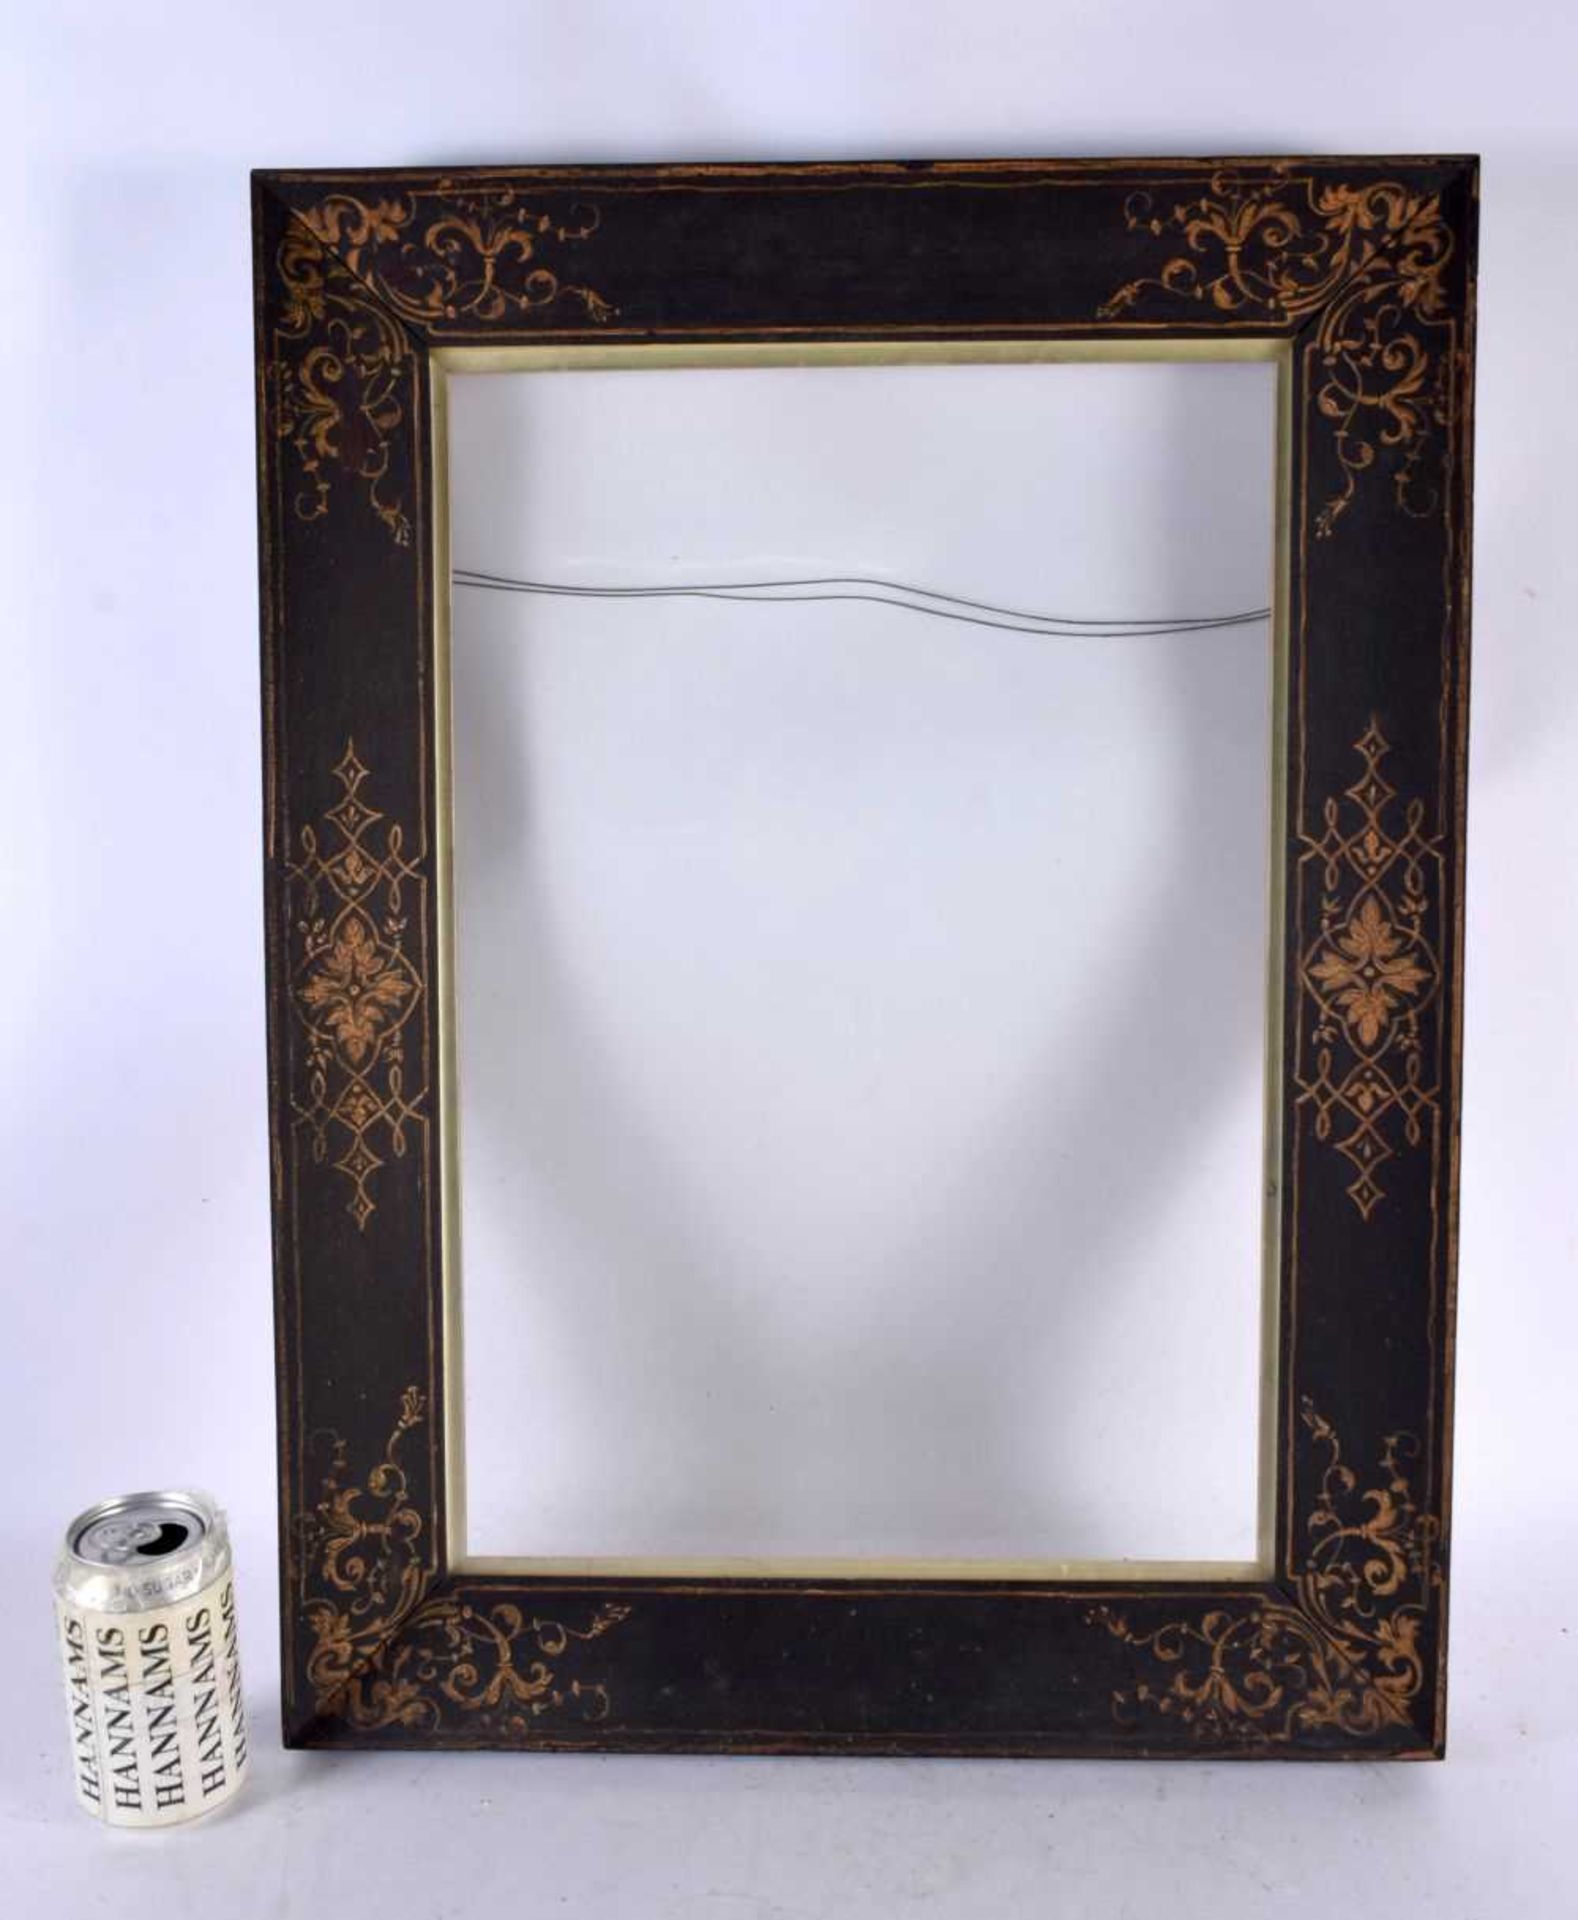 AN EARLY 19TH CENTURY PAINTED AND LACQUERED ROSEWOOD PICTURE FRAME decorated with pen work flowers